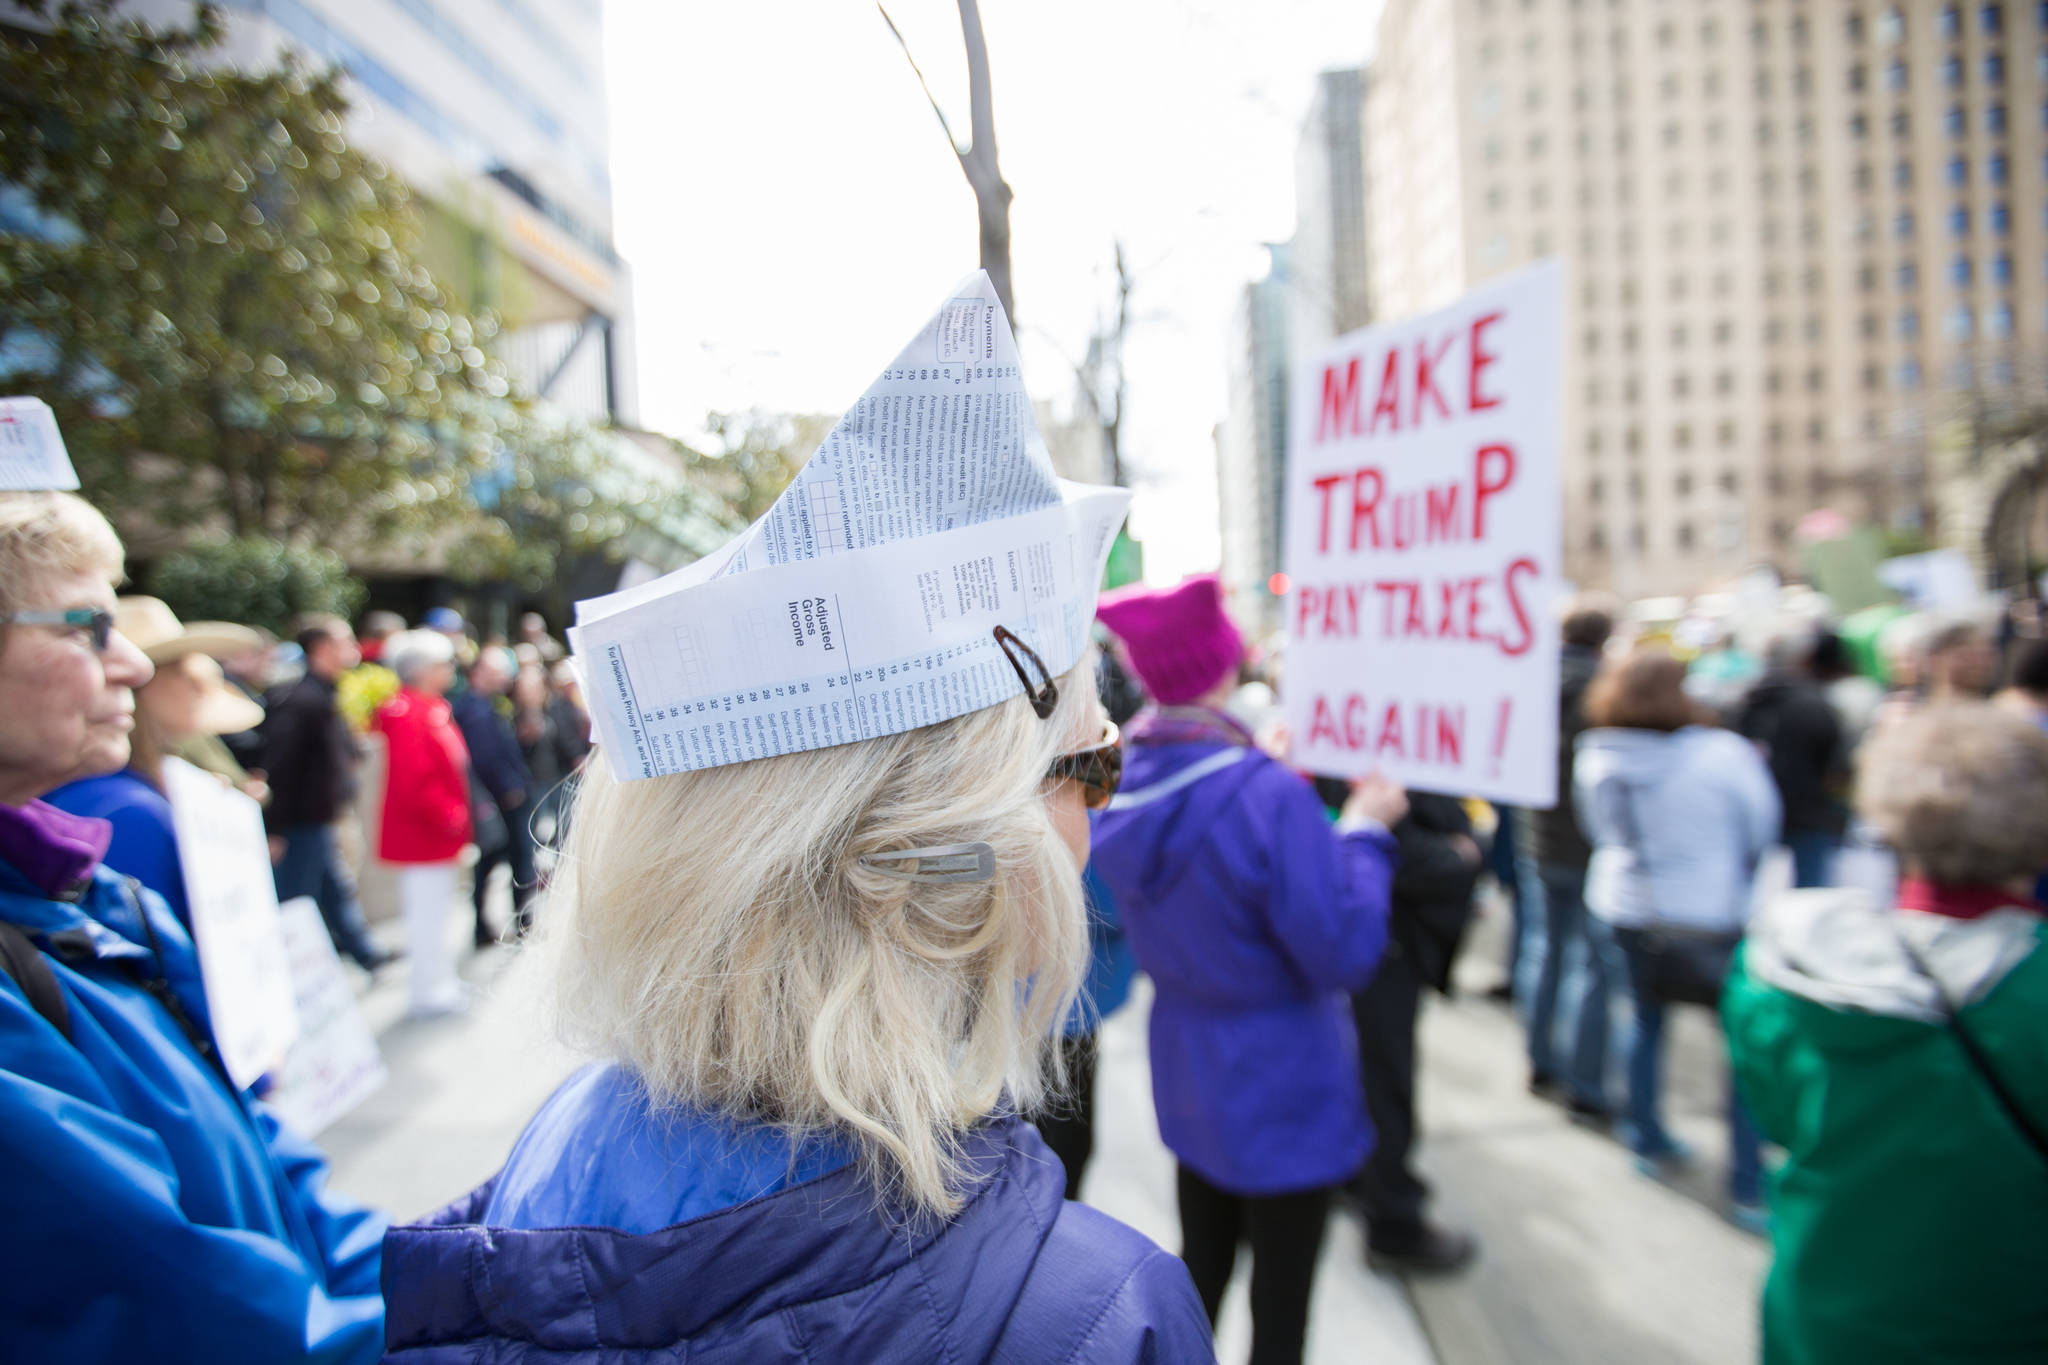 A protester wears a tax document as a hat as she waits to hear speakers at Seattle’s Tax March.